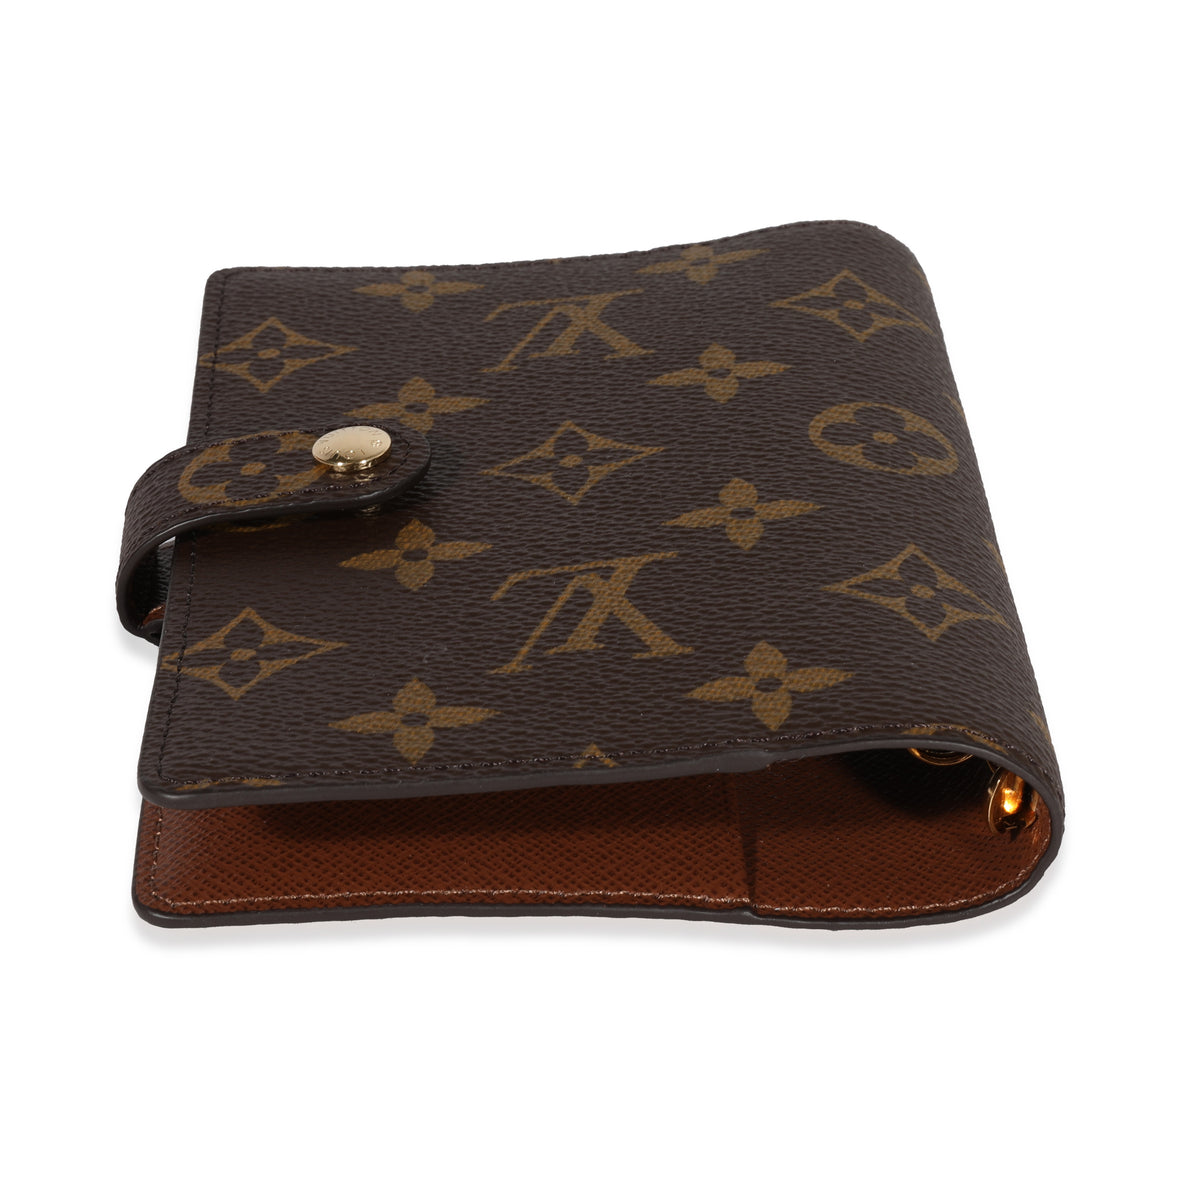 Louis Vuitton Agenda Cover Small Ring Monogram Brown in Canvas